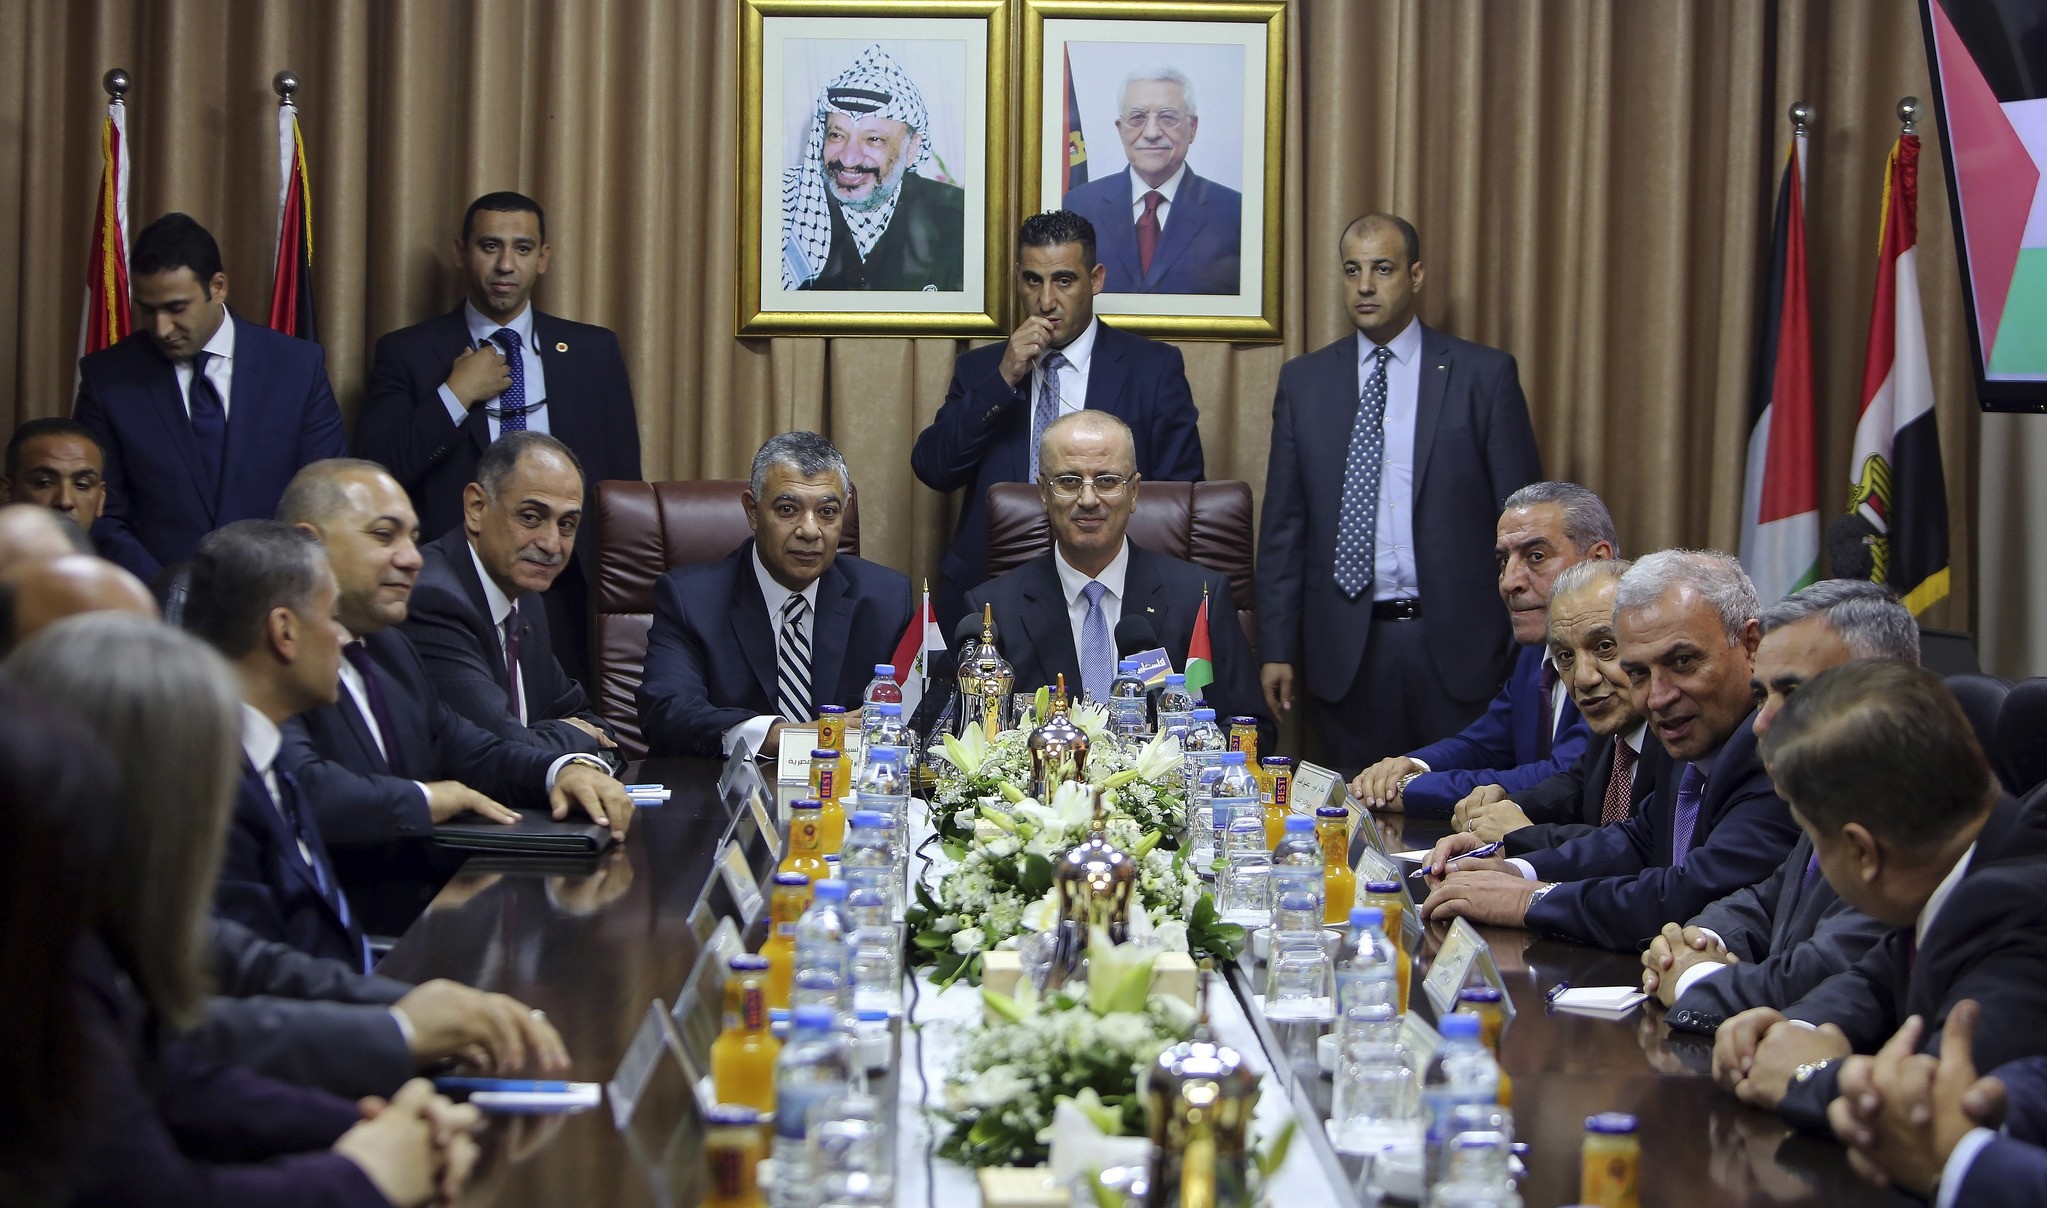 Palestinian Prime Minister Rami Hamdallah, center, heads a meeting with officials at Palestinian President Mahmoud Abbas' former official residence, in Gaza City, Tuesday, Oct. 3, 2017. (AP Photo)